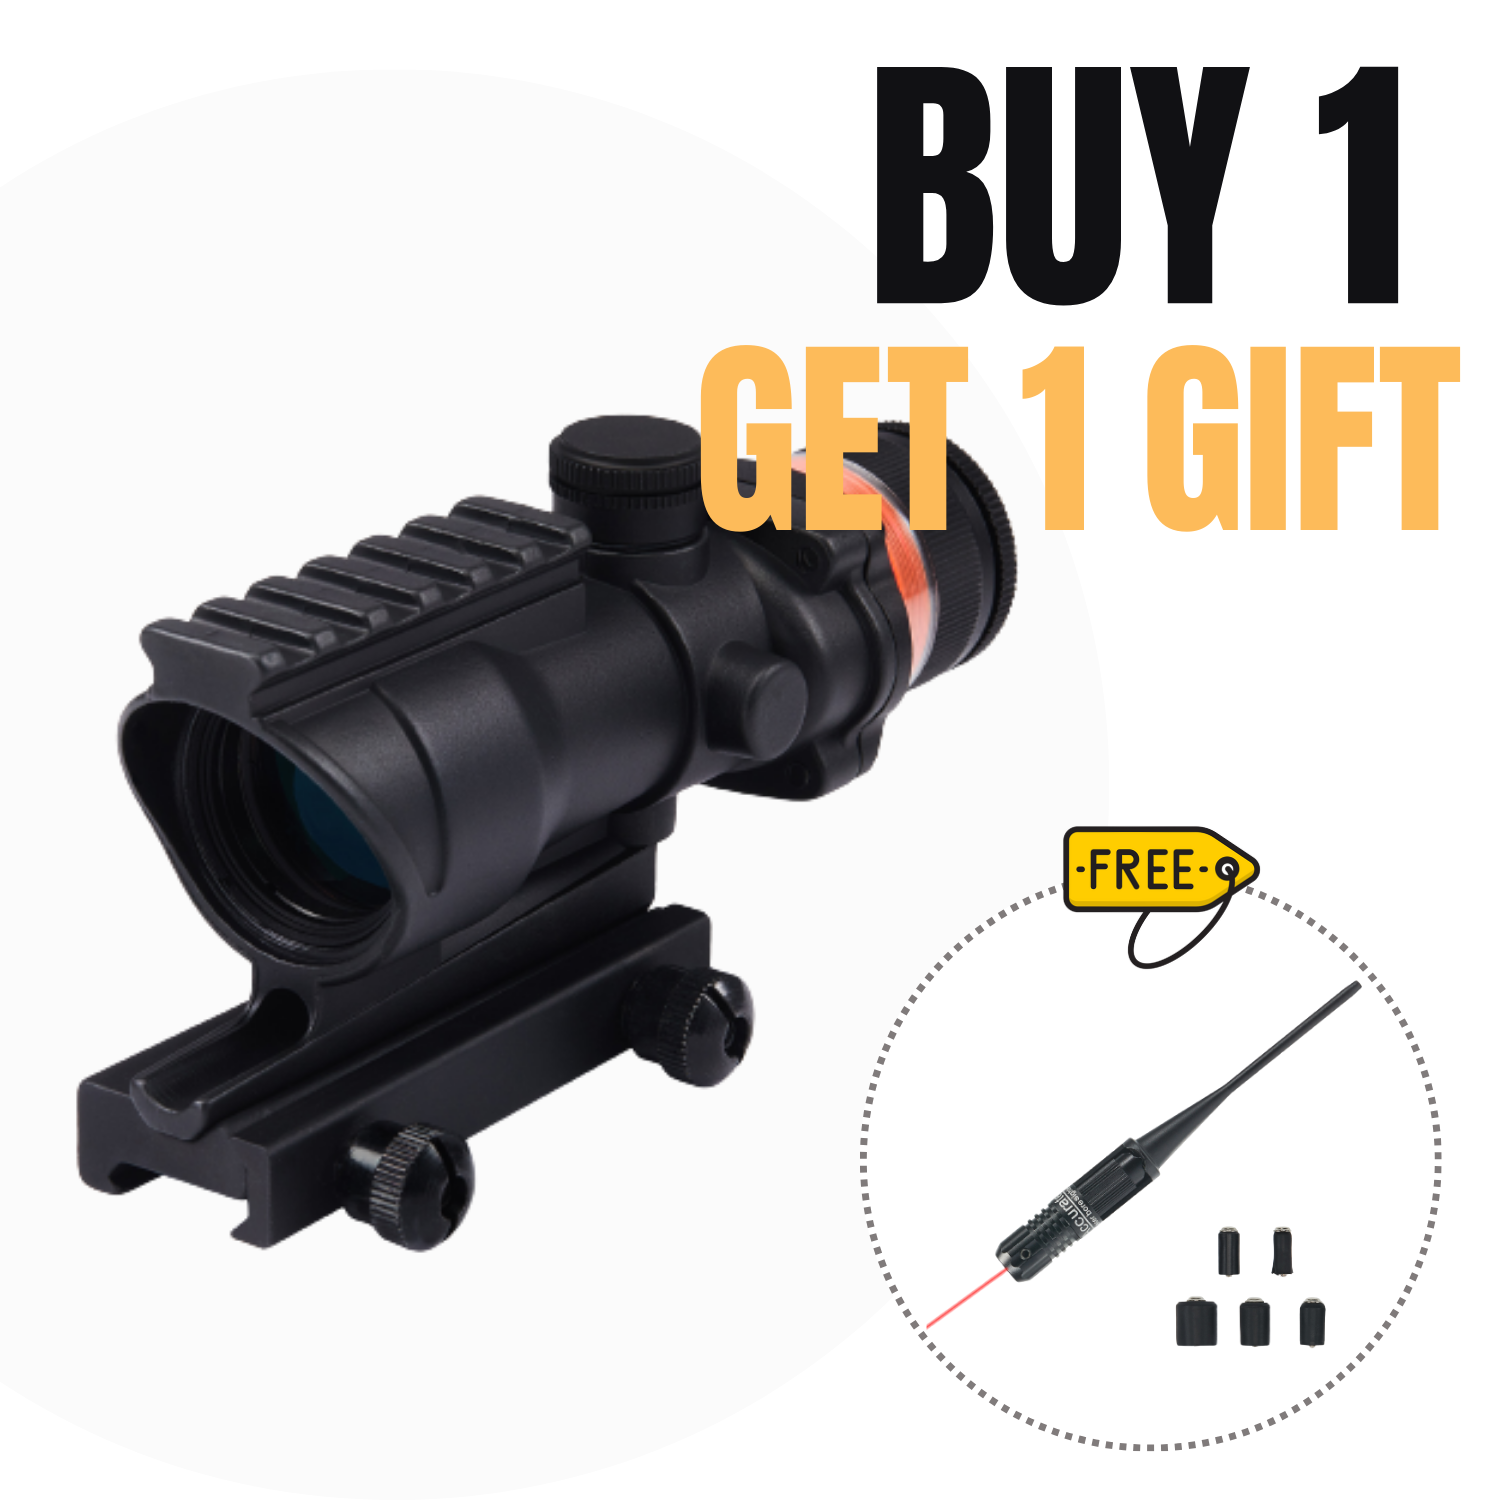 【BUY 1 GET 1 FREE BORESIGHT GIFT】4x32 Tactical Rifle Scope with True Fiber Optic Red Illuminated Crosshair & Picatinny Rail on Top